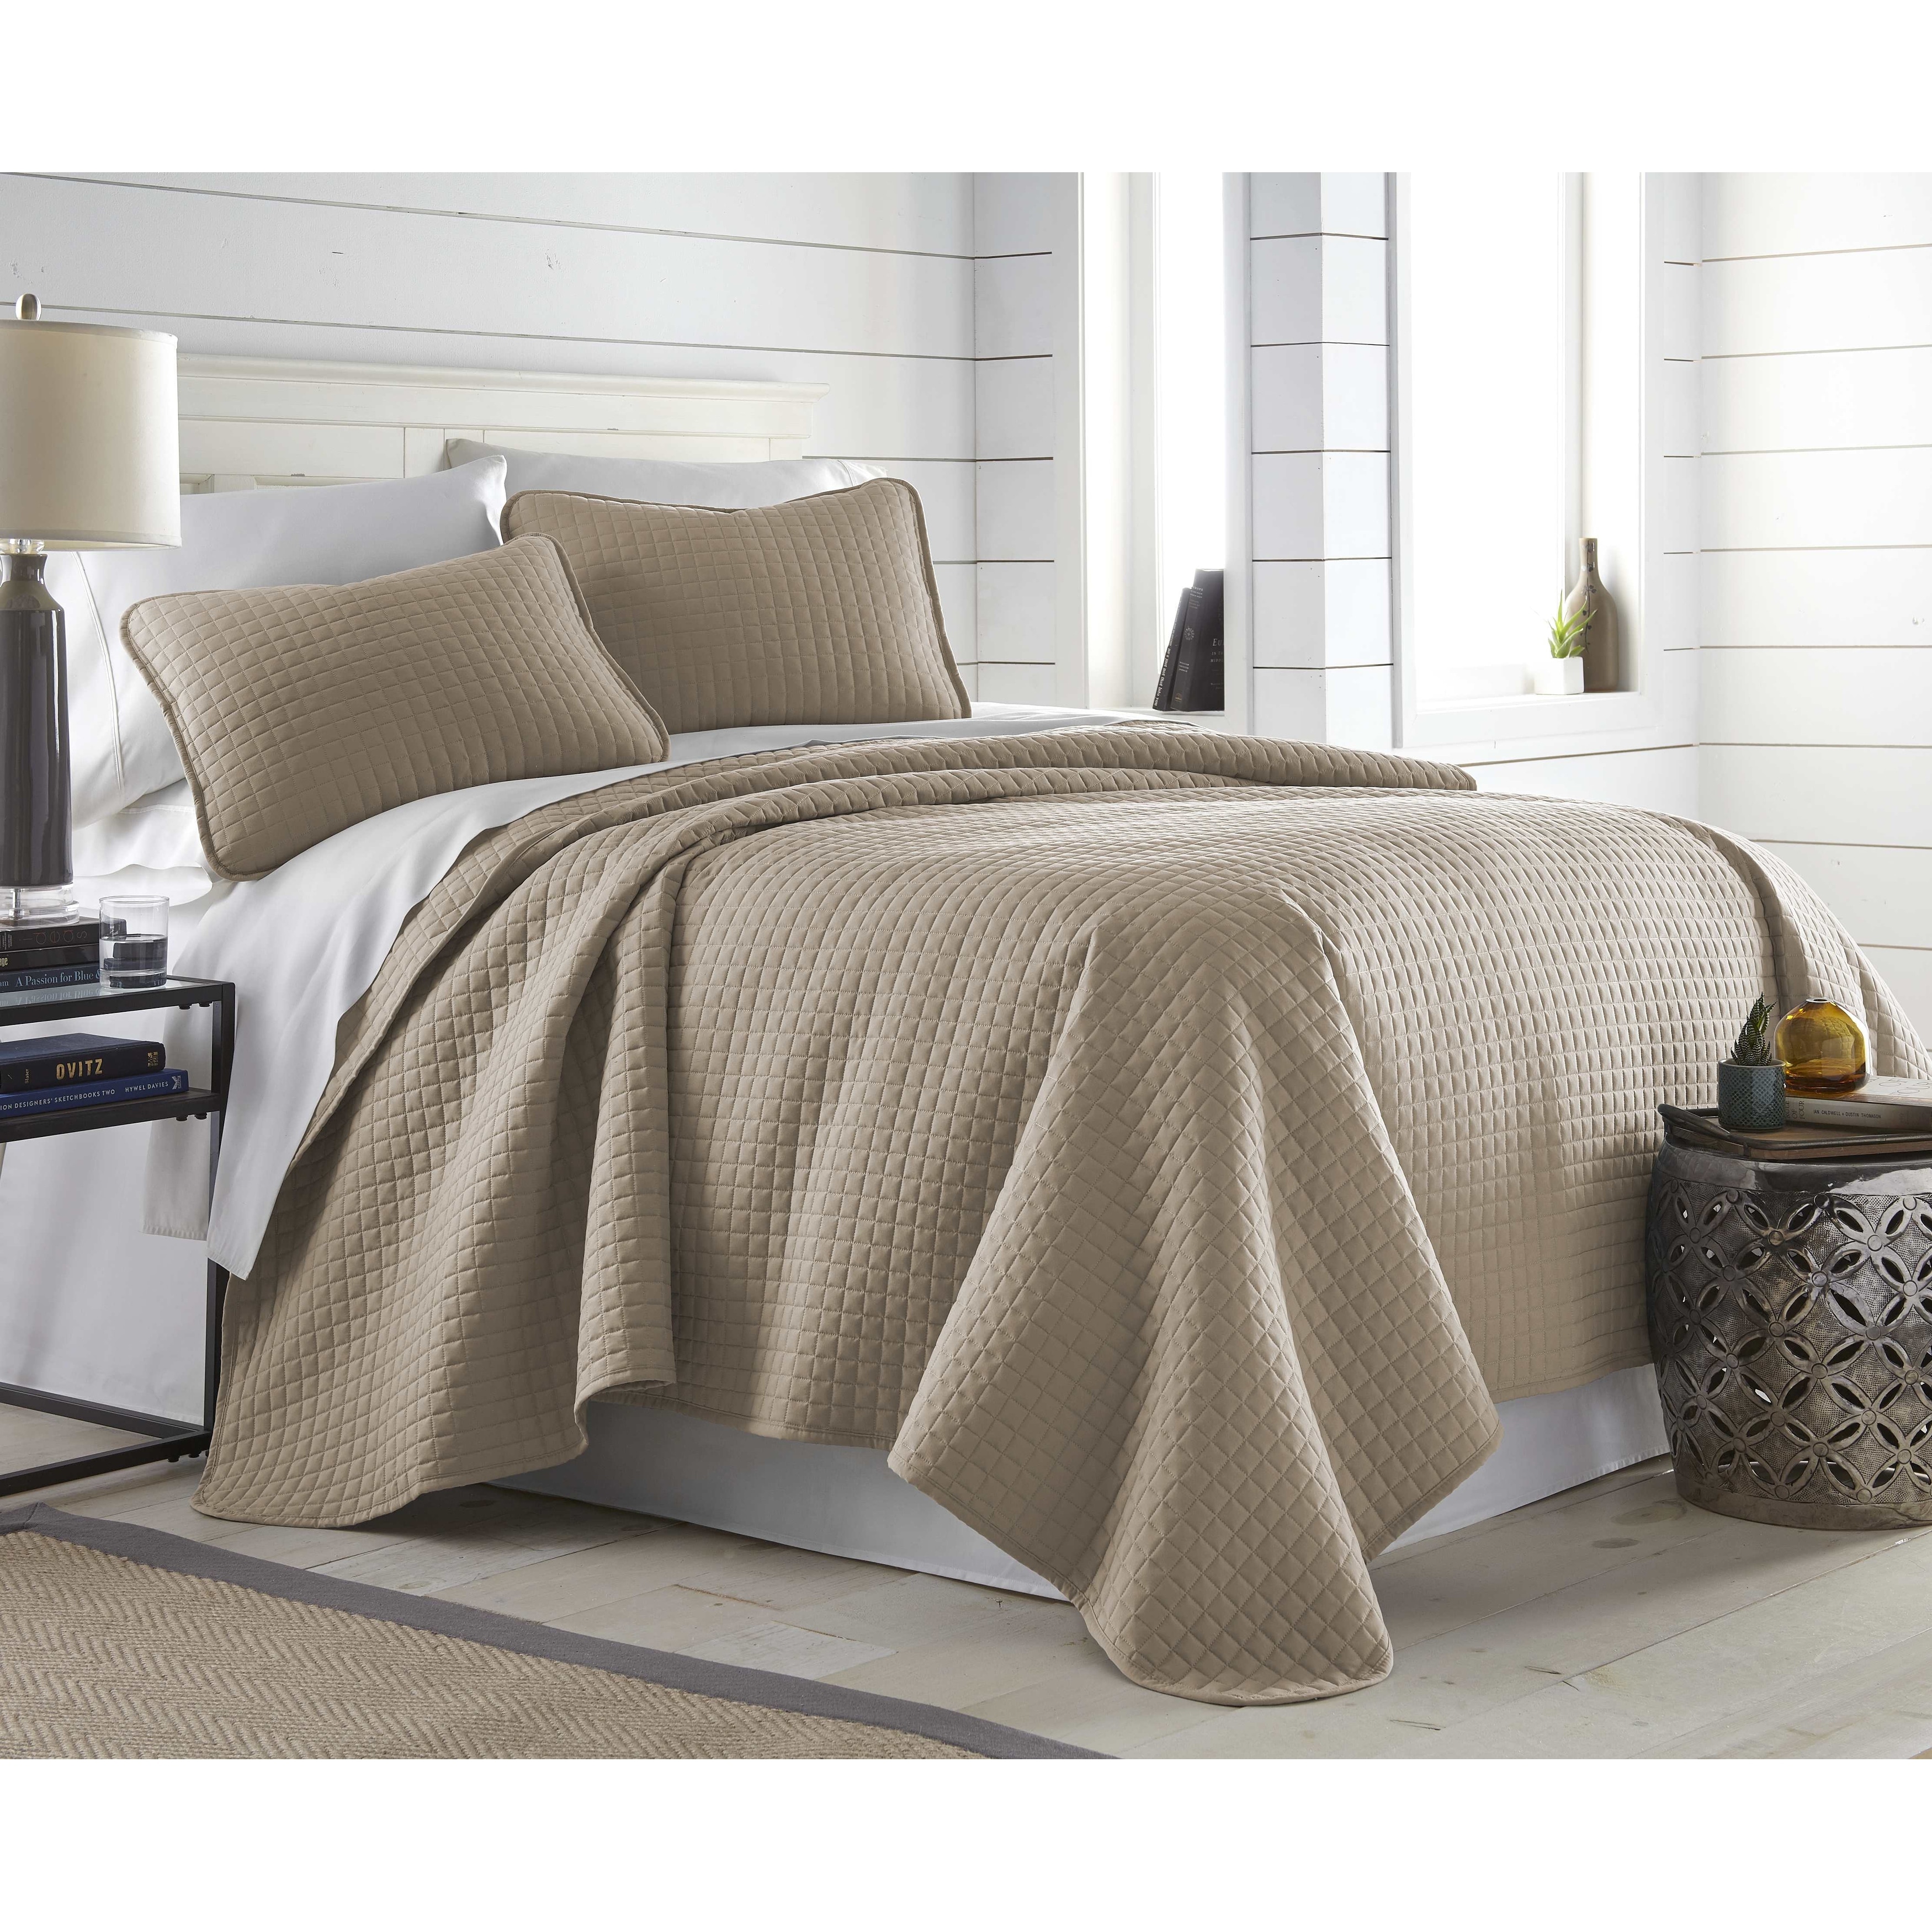 9 colors 3-Piece Oversized Bedspread Coverlet Set with Shams 